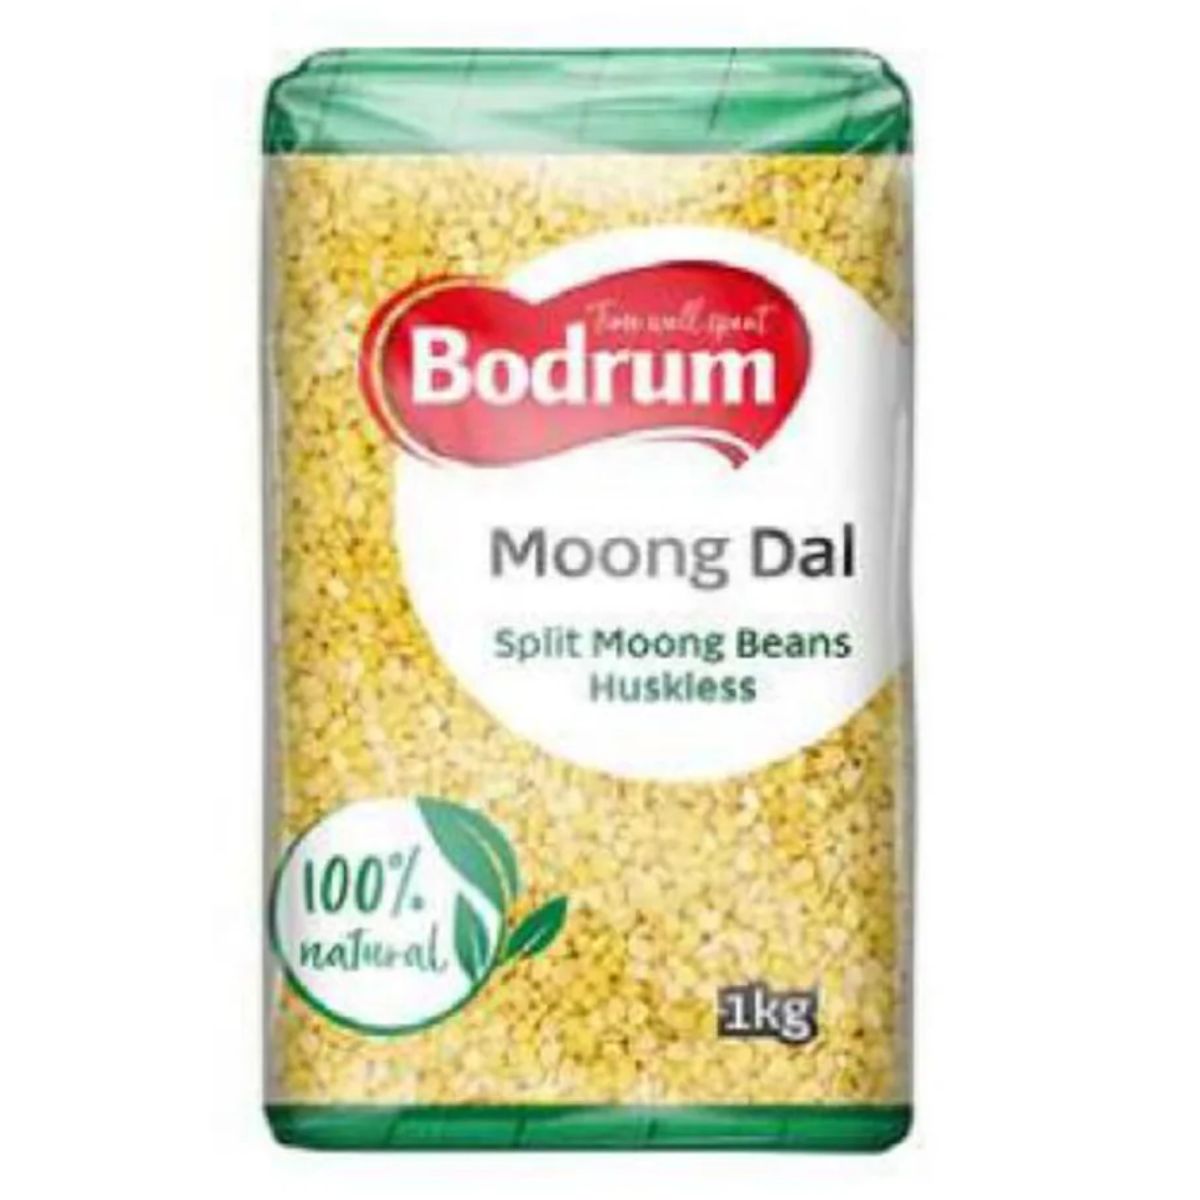 A bag of Bodrum - Split Moong Beans Huskless - 1kg with a label.